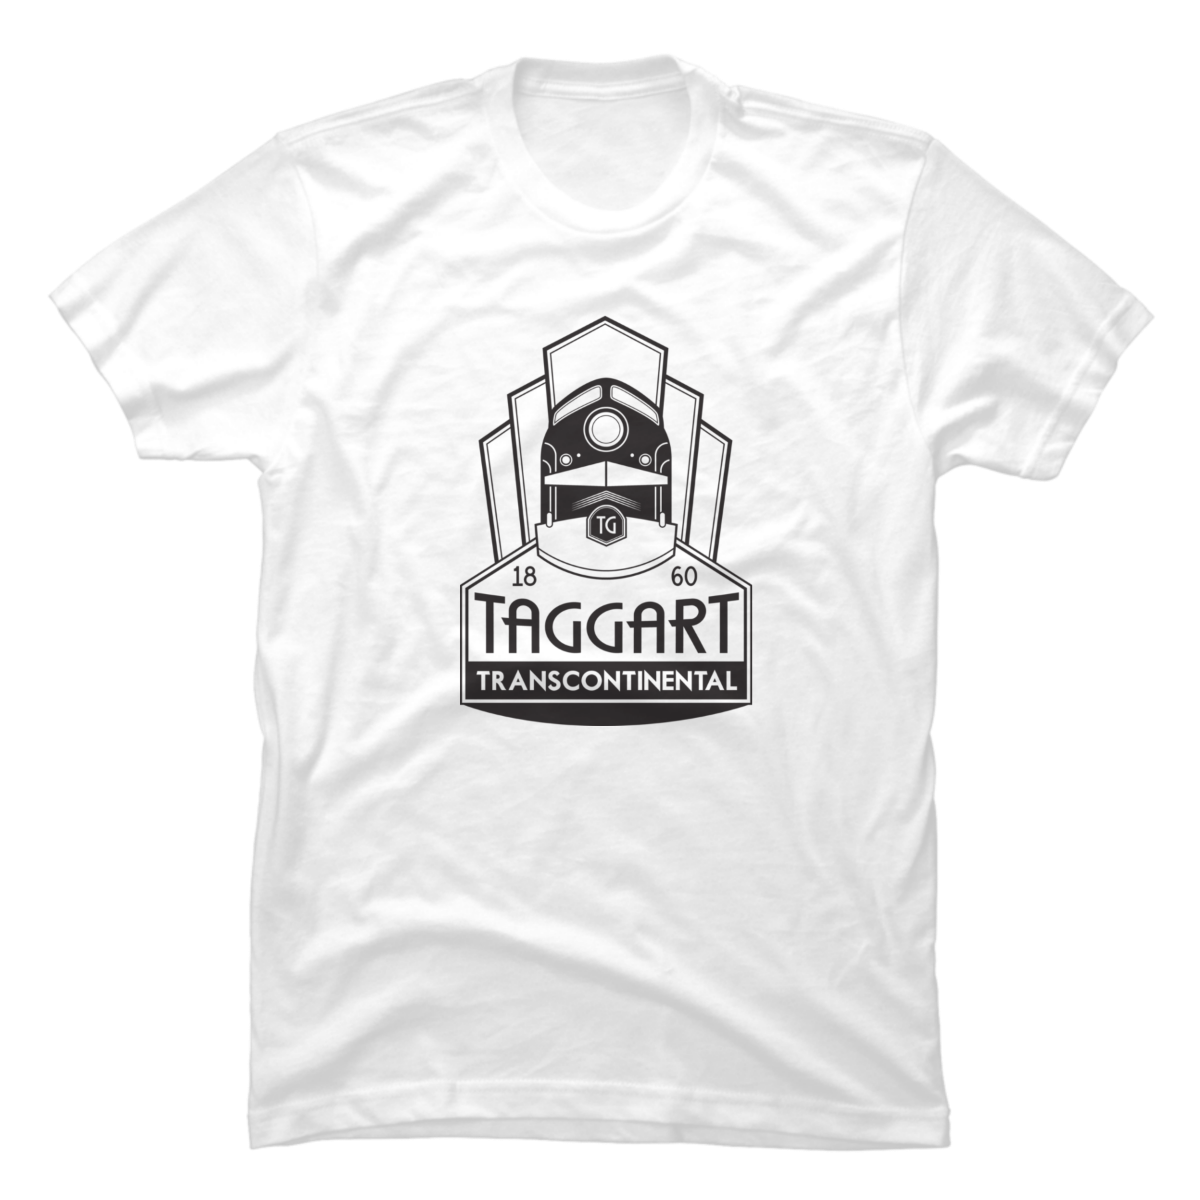 andrew taggart shirt